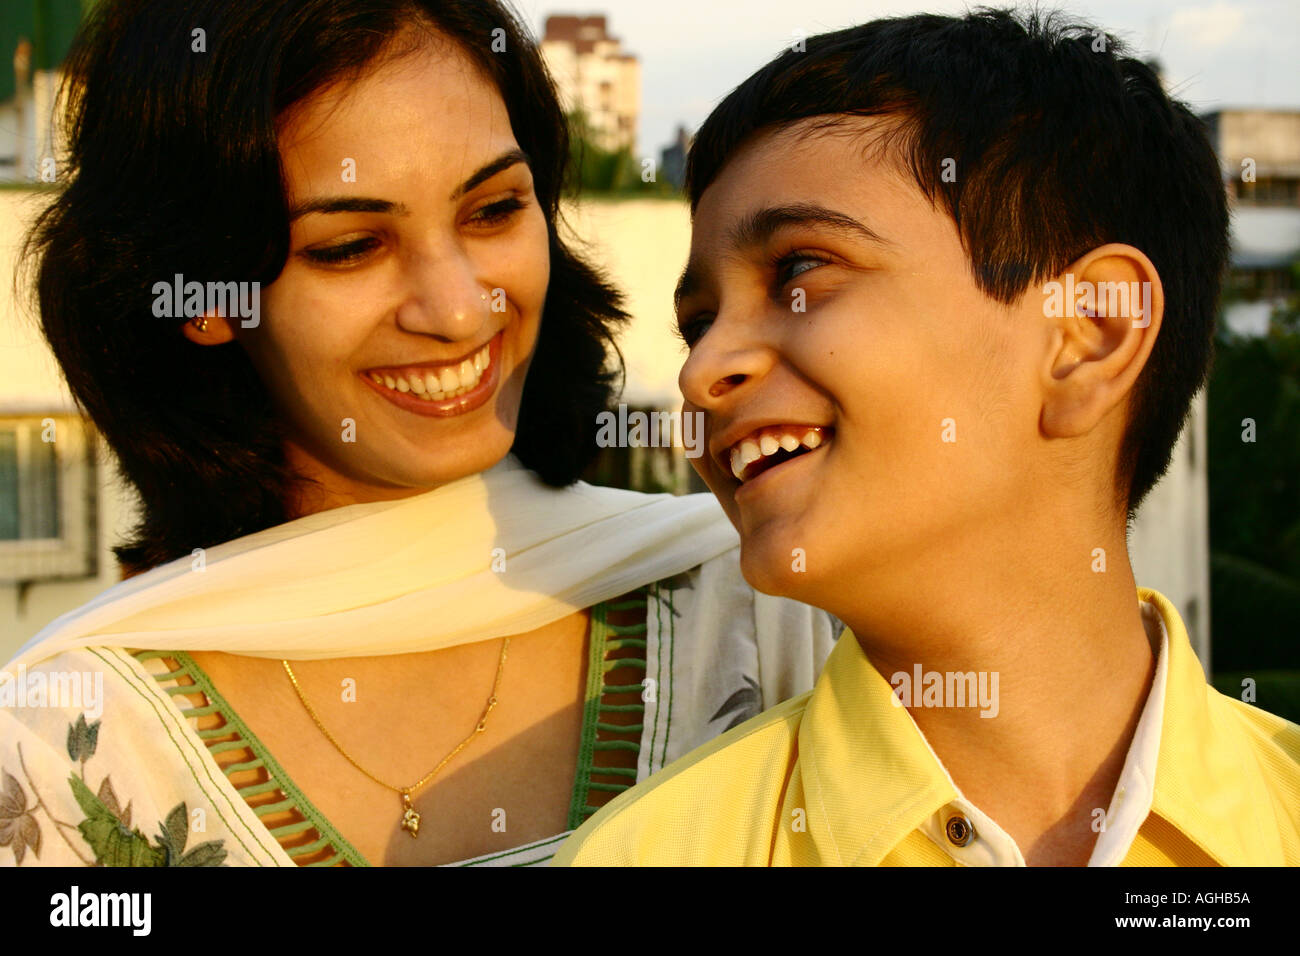 Indian Mother And Teen Son High Resolution Stock Photog